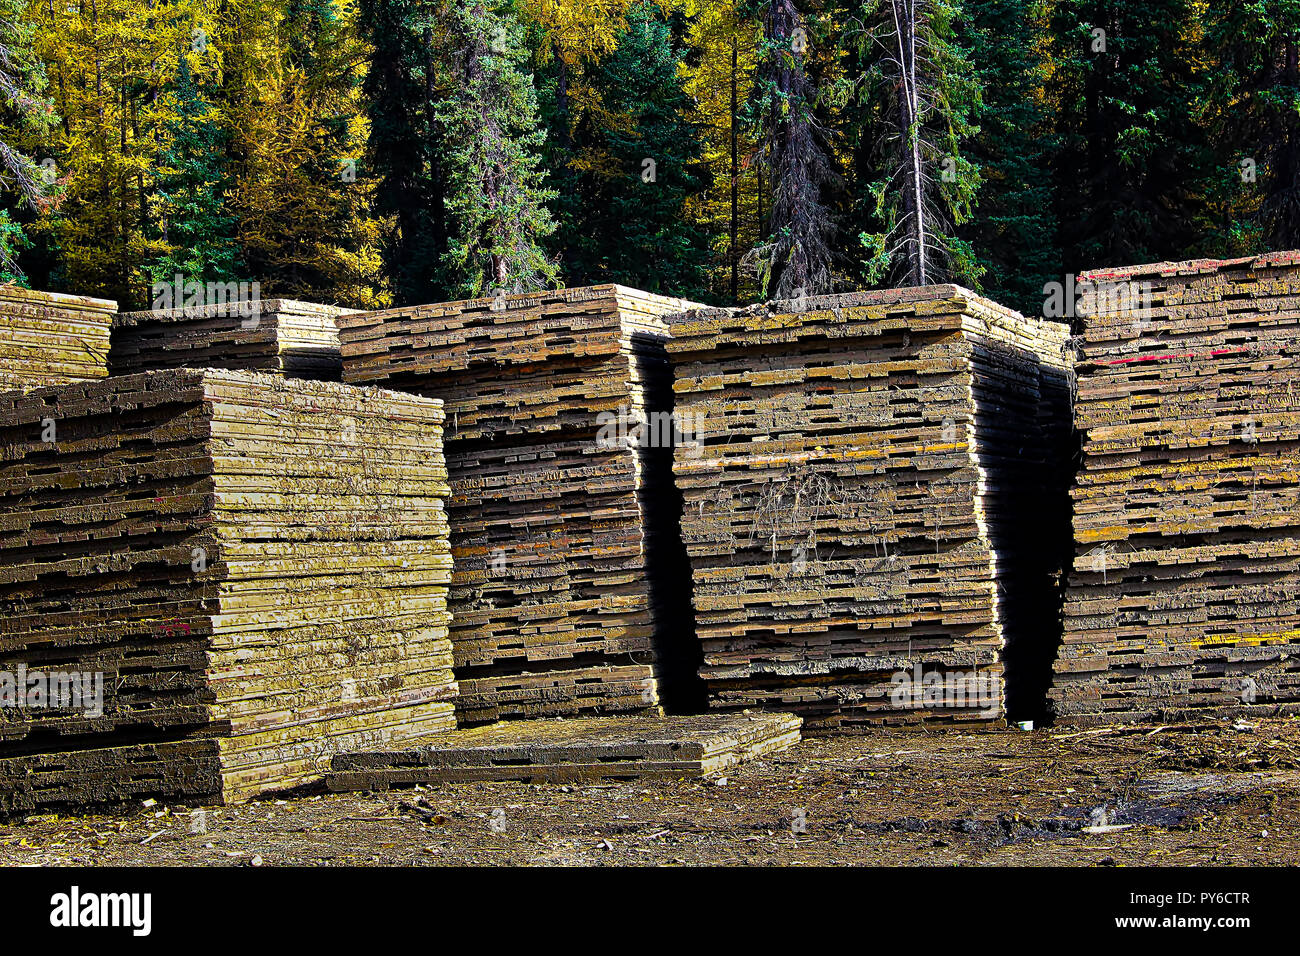 Piles of access mats used to build roads in wet areas Stock Photo